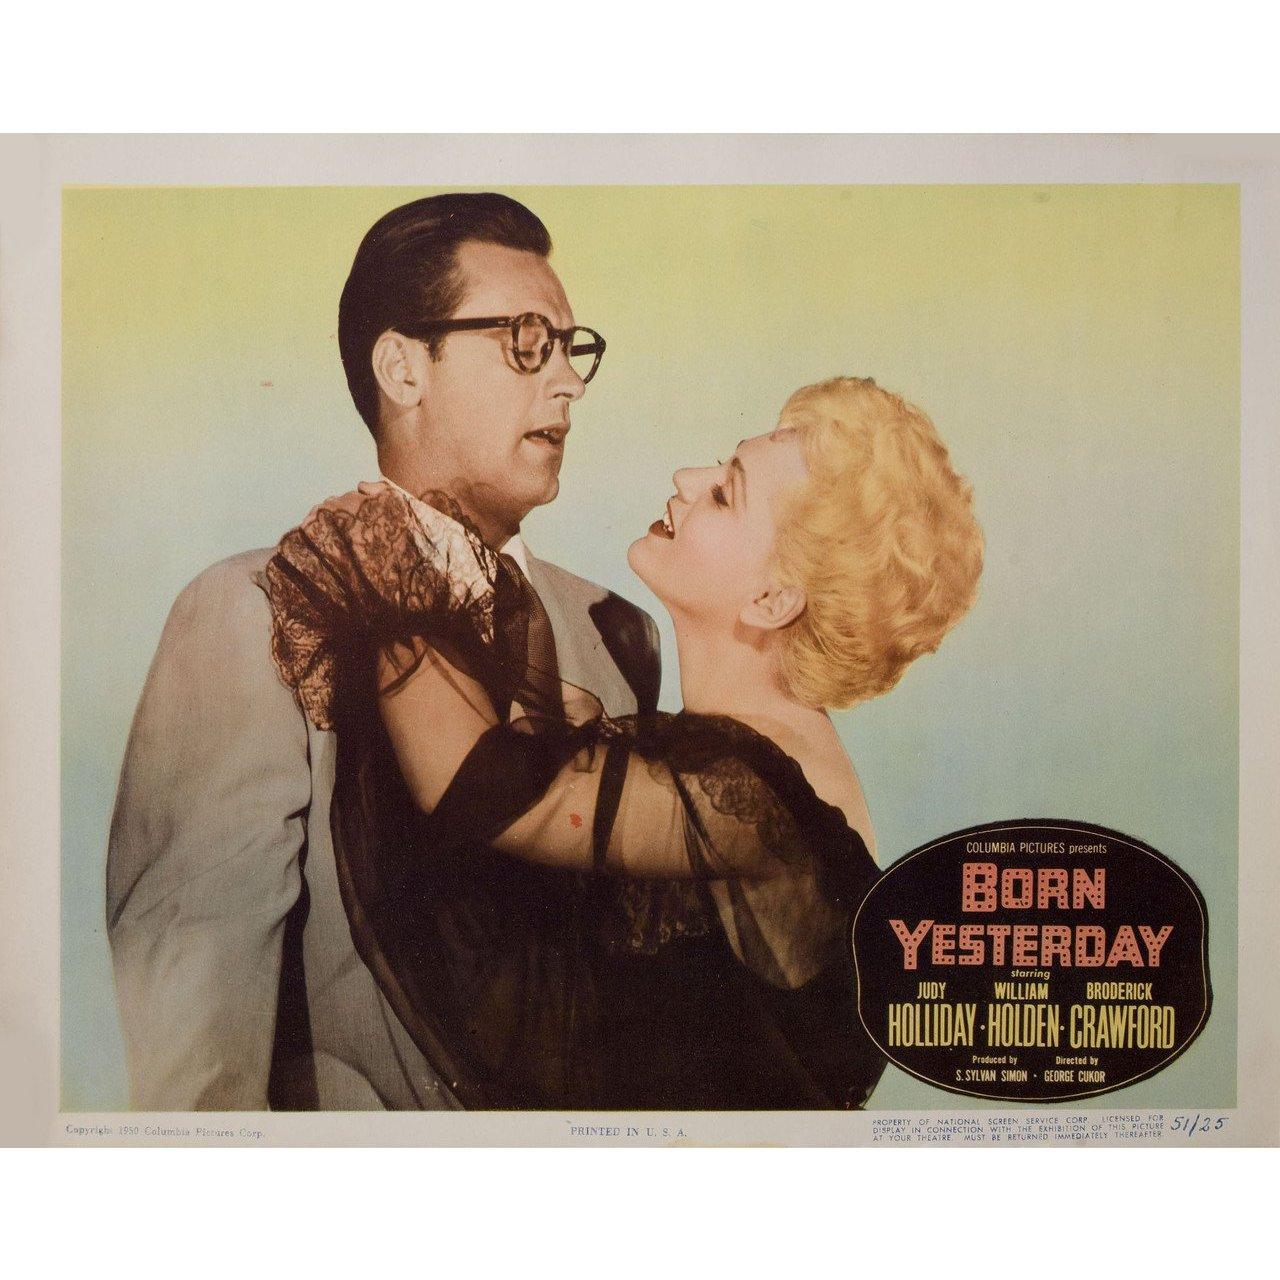 Original 1950 U.S. scene card for the film Born Yesterday directed by George Cukor with Judy Holliday / Broderick Crawford / William Holden / Howard St. John. Fine condition. Please note: the size is stated in inches and the actual size can vary by